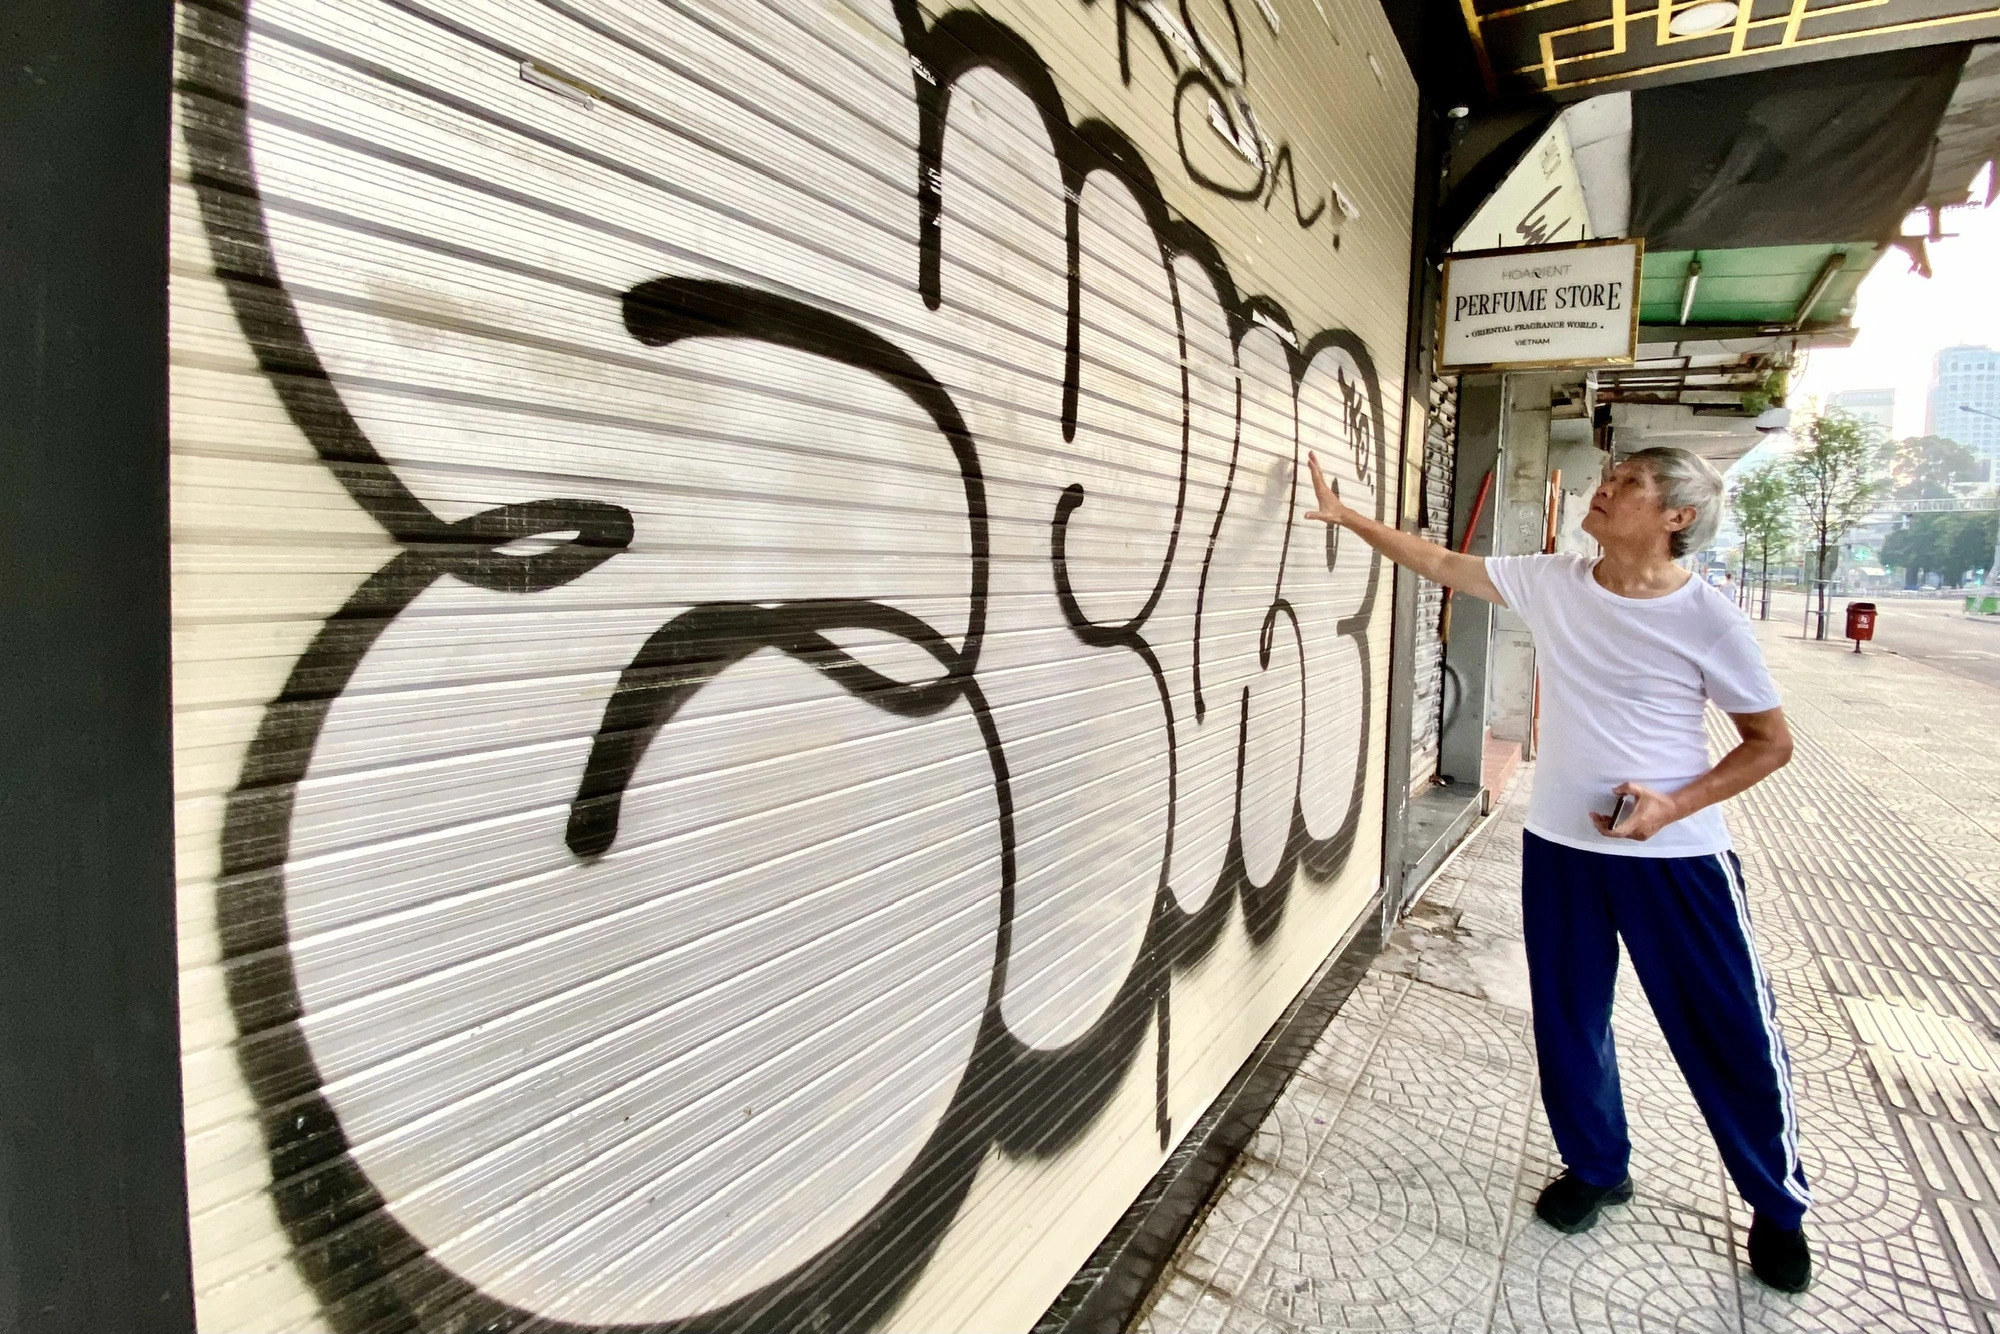 The biggest graffiti piece along the street is possibly more than one meter long. Photo: Tien Quoc / Tuoi Tre